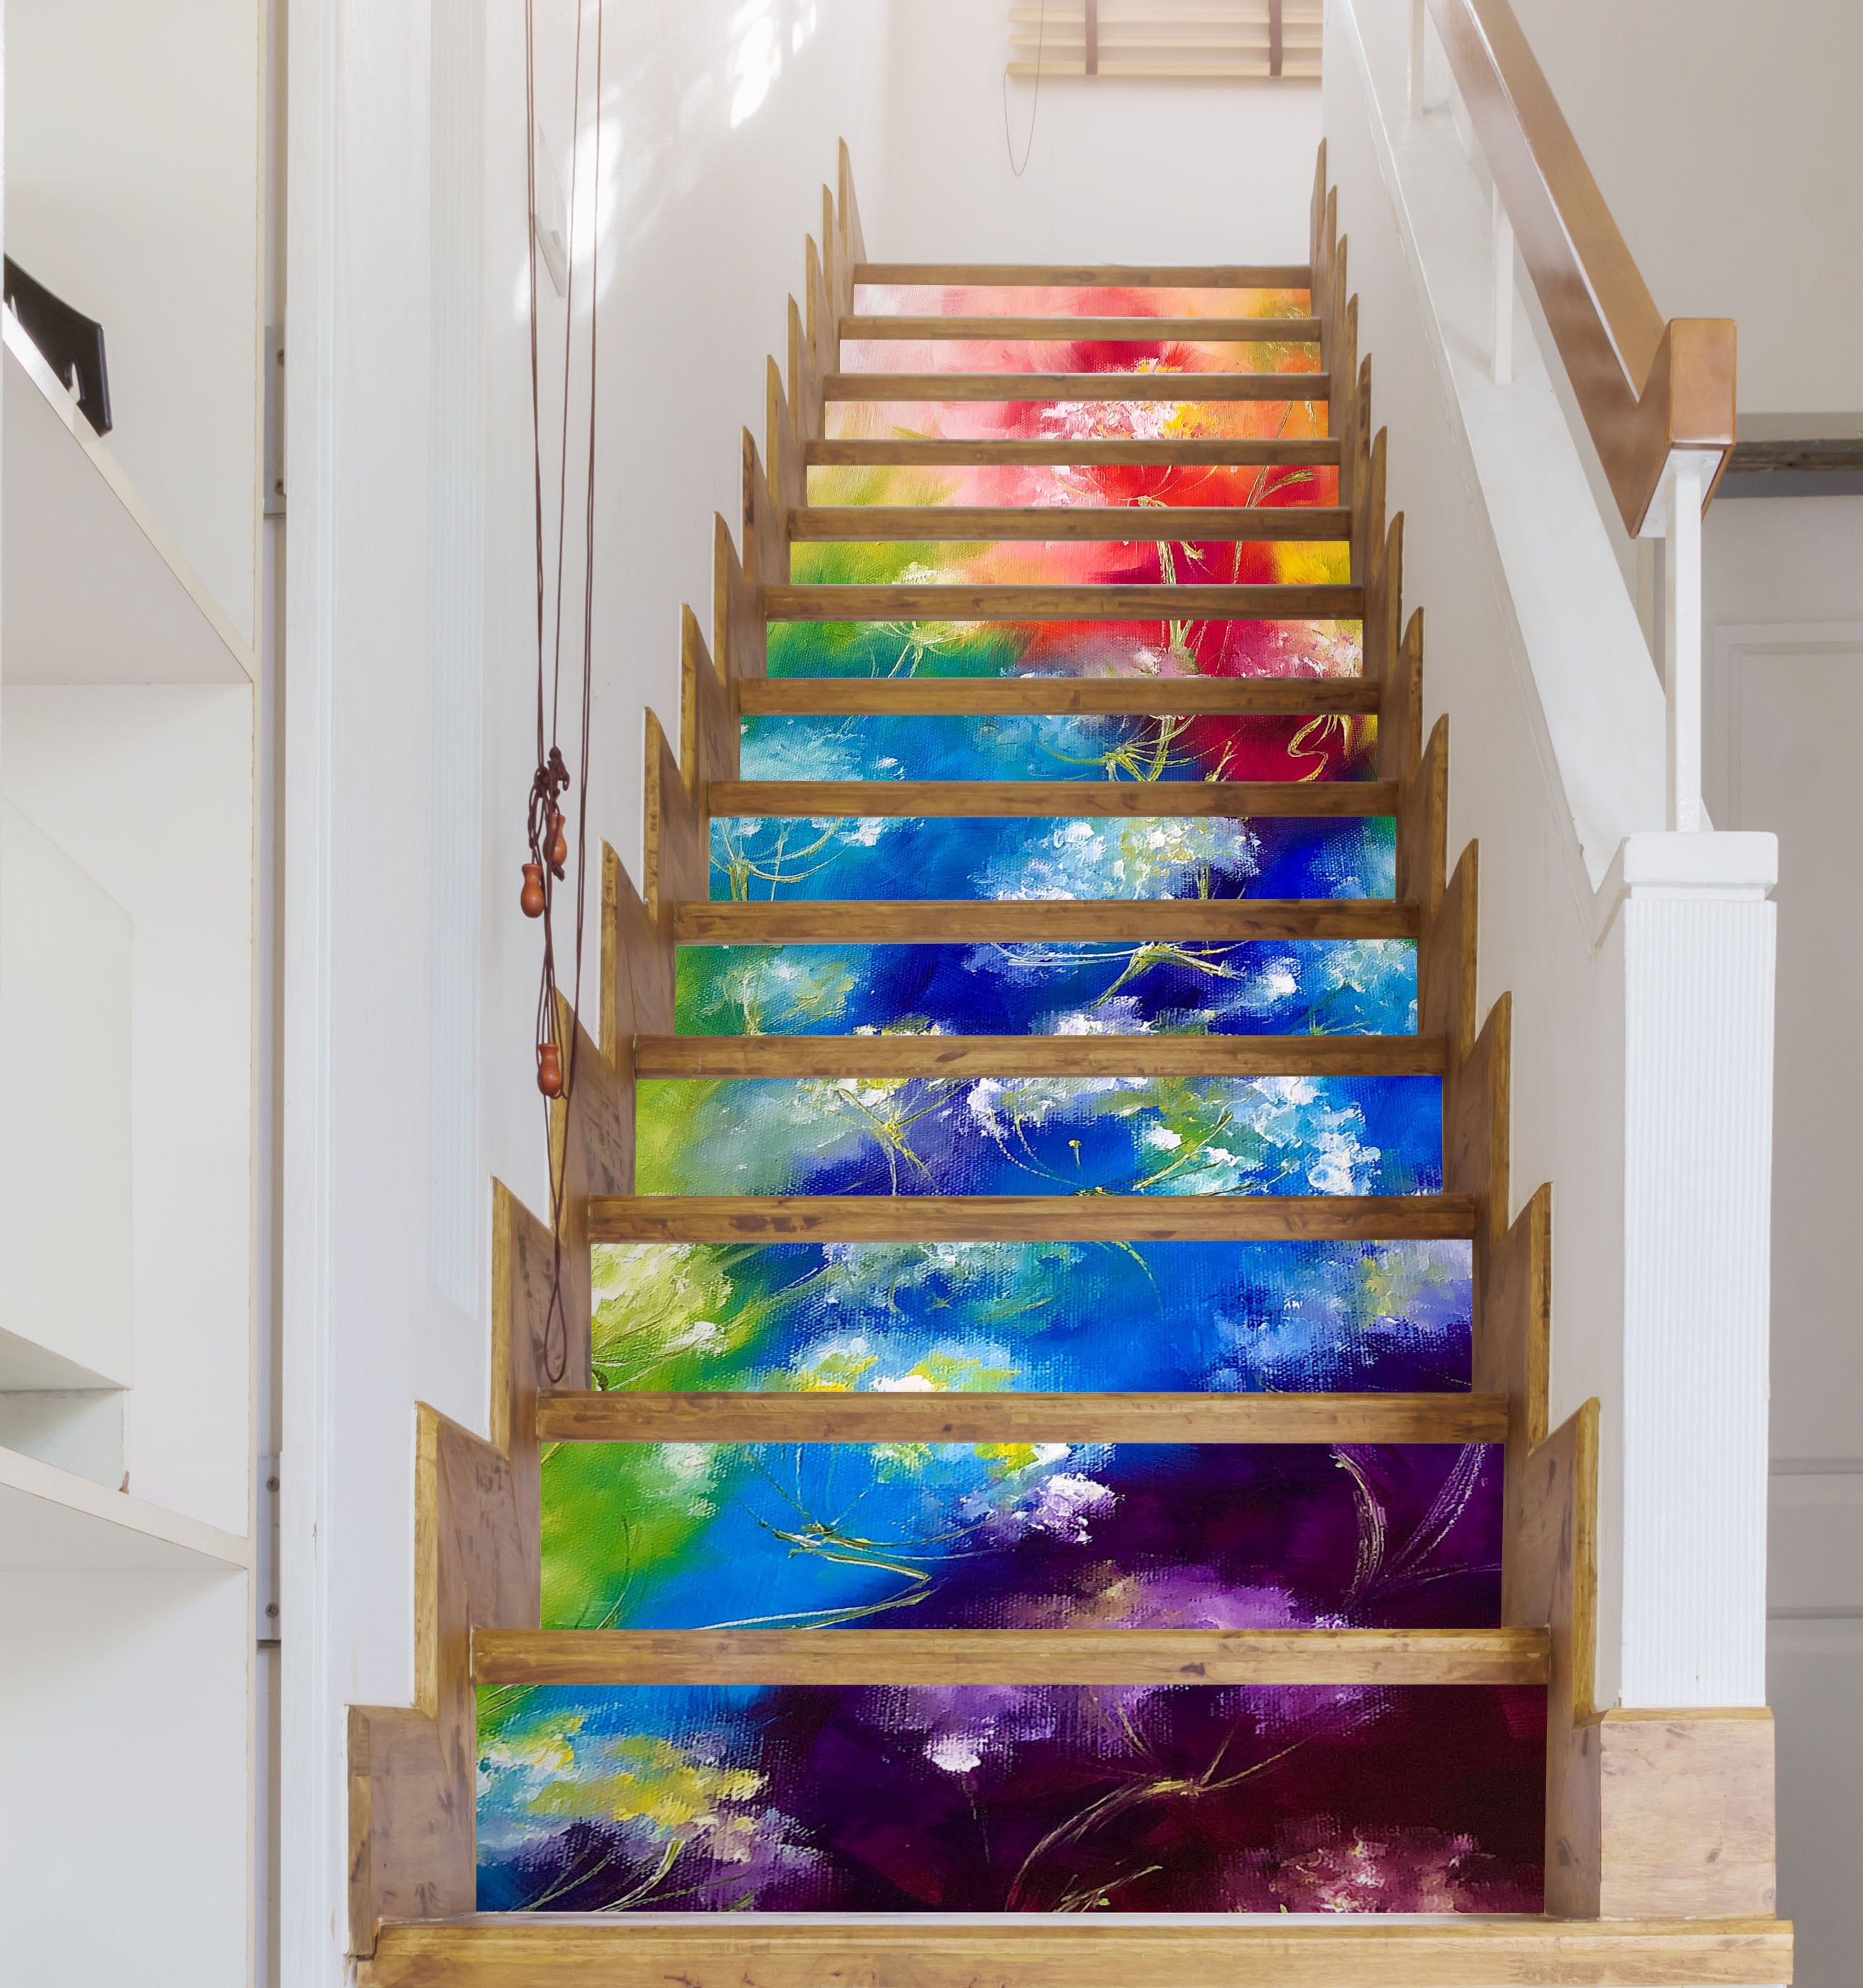 3D Color Painting 2212 Skromova Marina Stair Risers